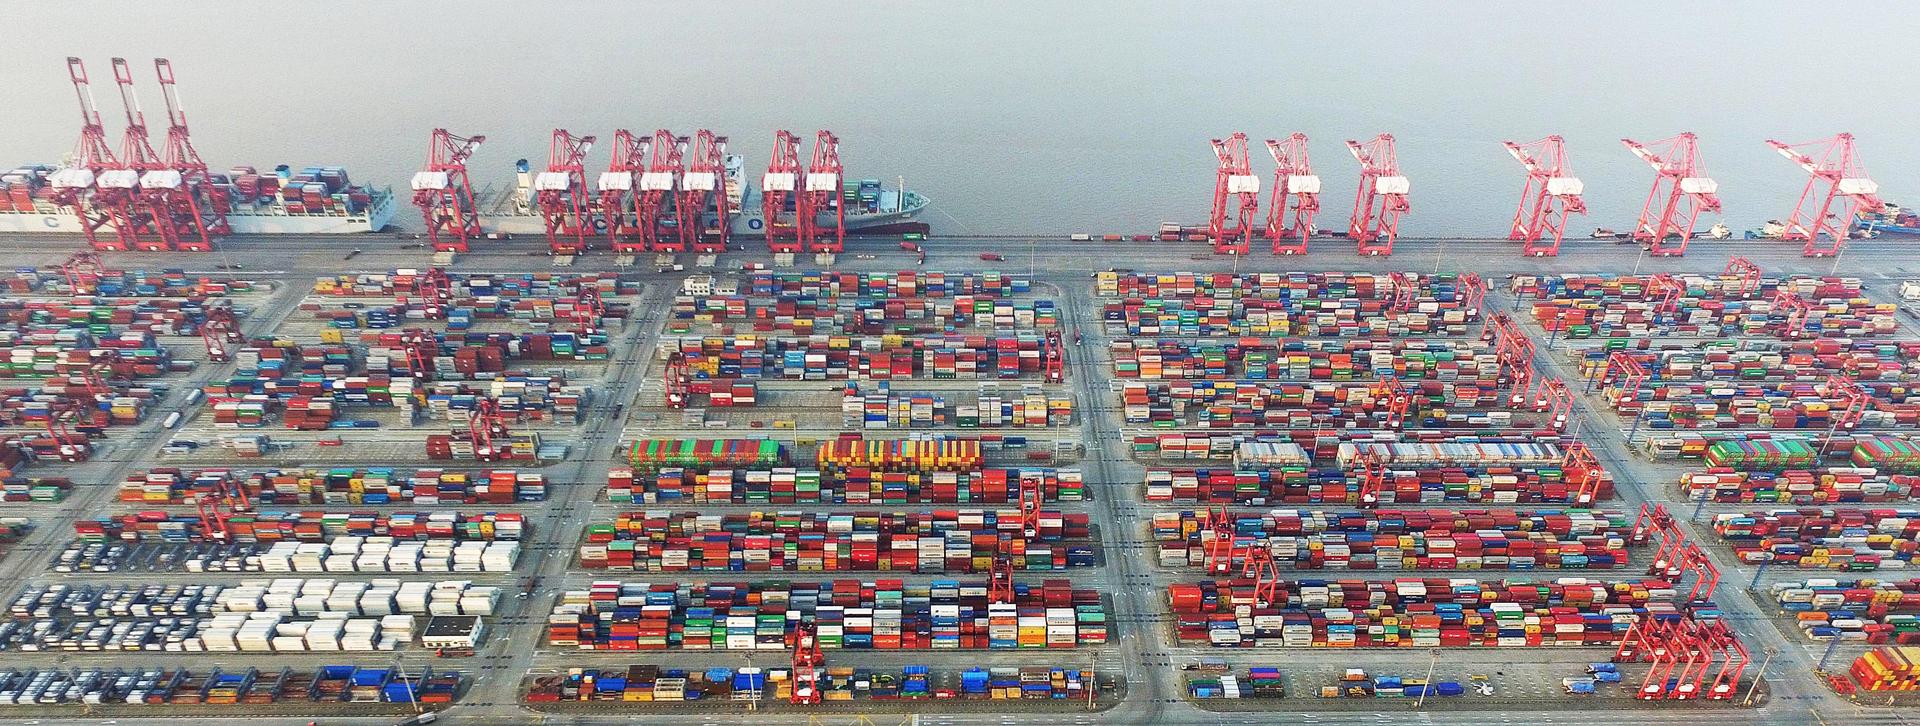 The Yangshan container port in Shanghai's free-trade zone. Photo: Xinhua